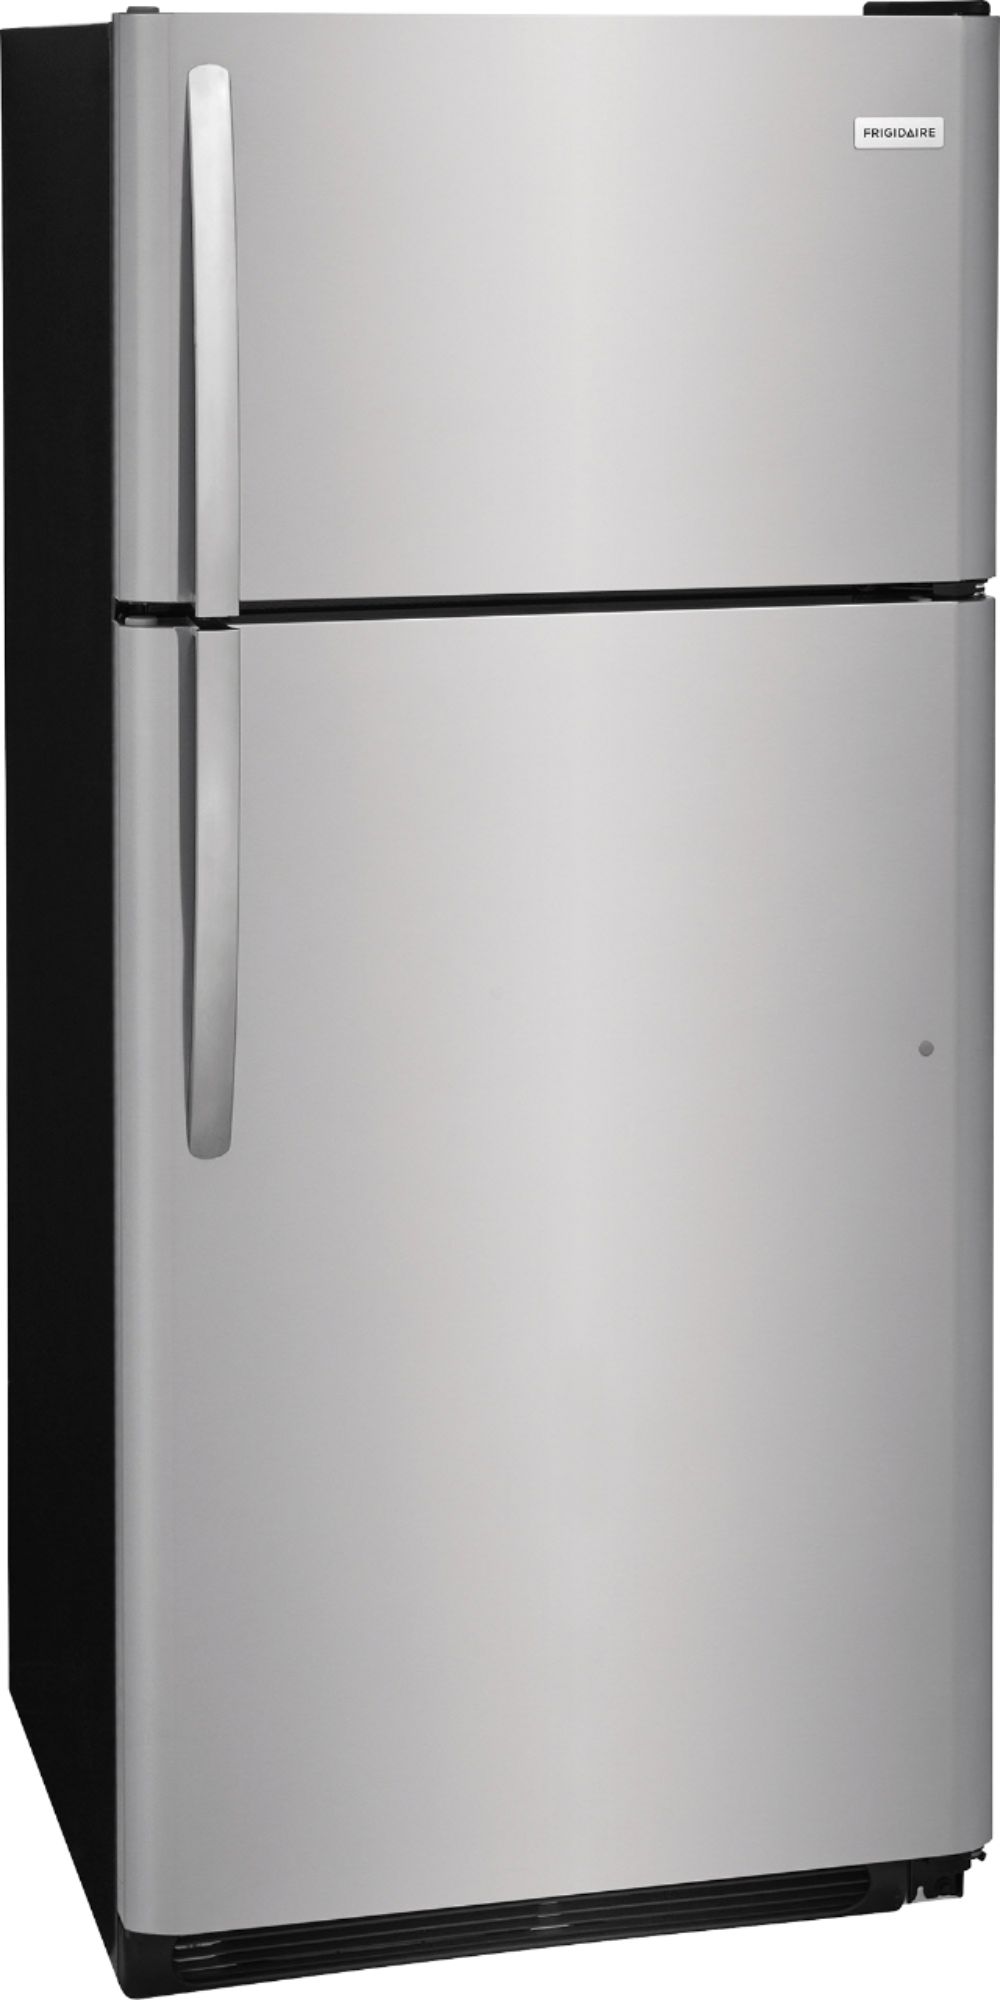 Angle View: Bertazzoni - Professional Series 17.7 Cu. Ft. Bottom-Freezer Built-In Refrigerator - Stainless steel